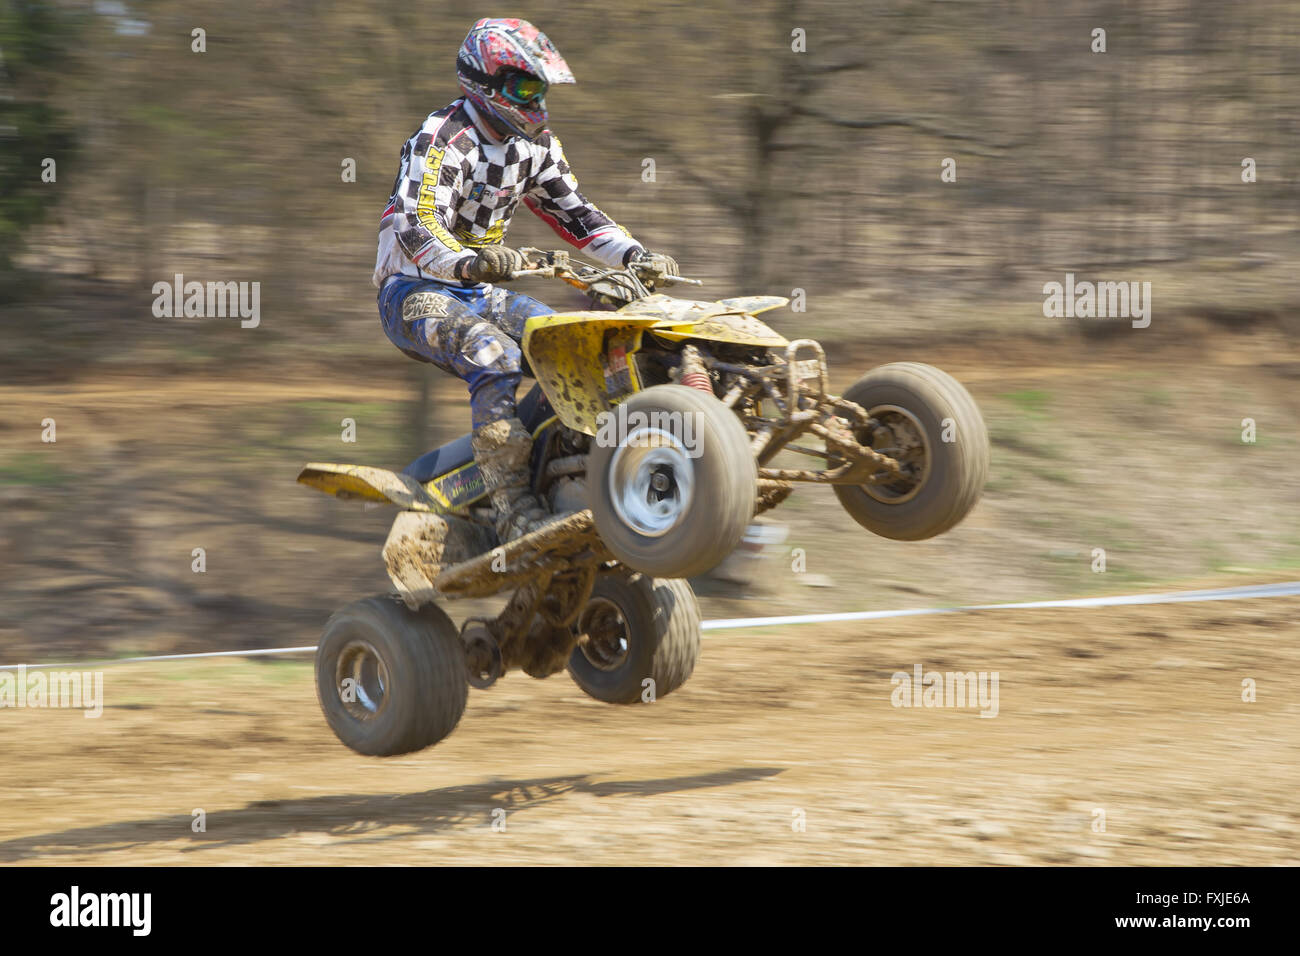 Dynamic shot of racer on quad motorbike in the race Stock Photo